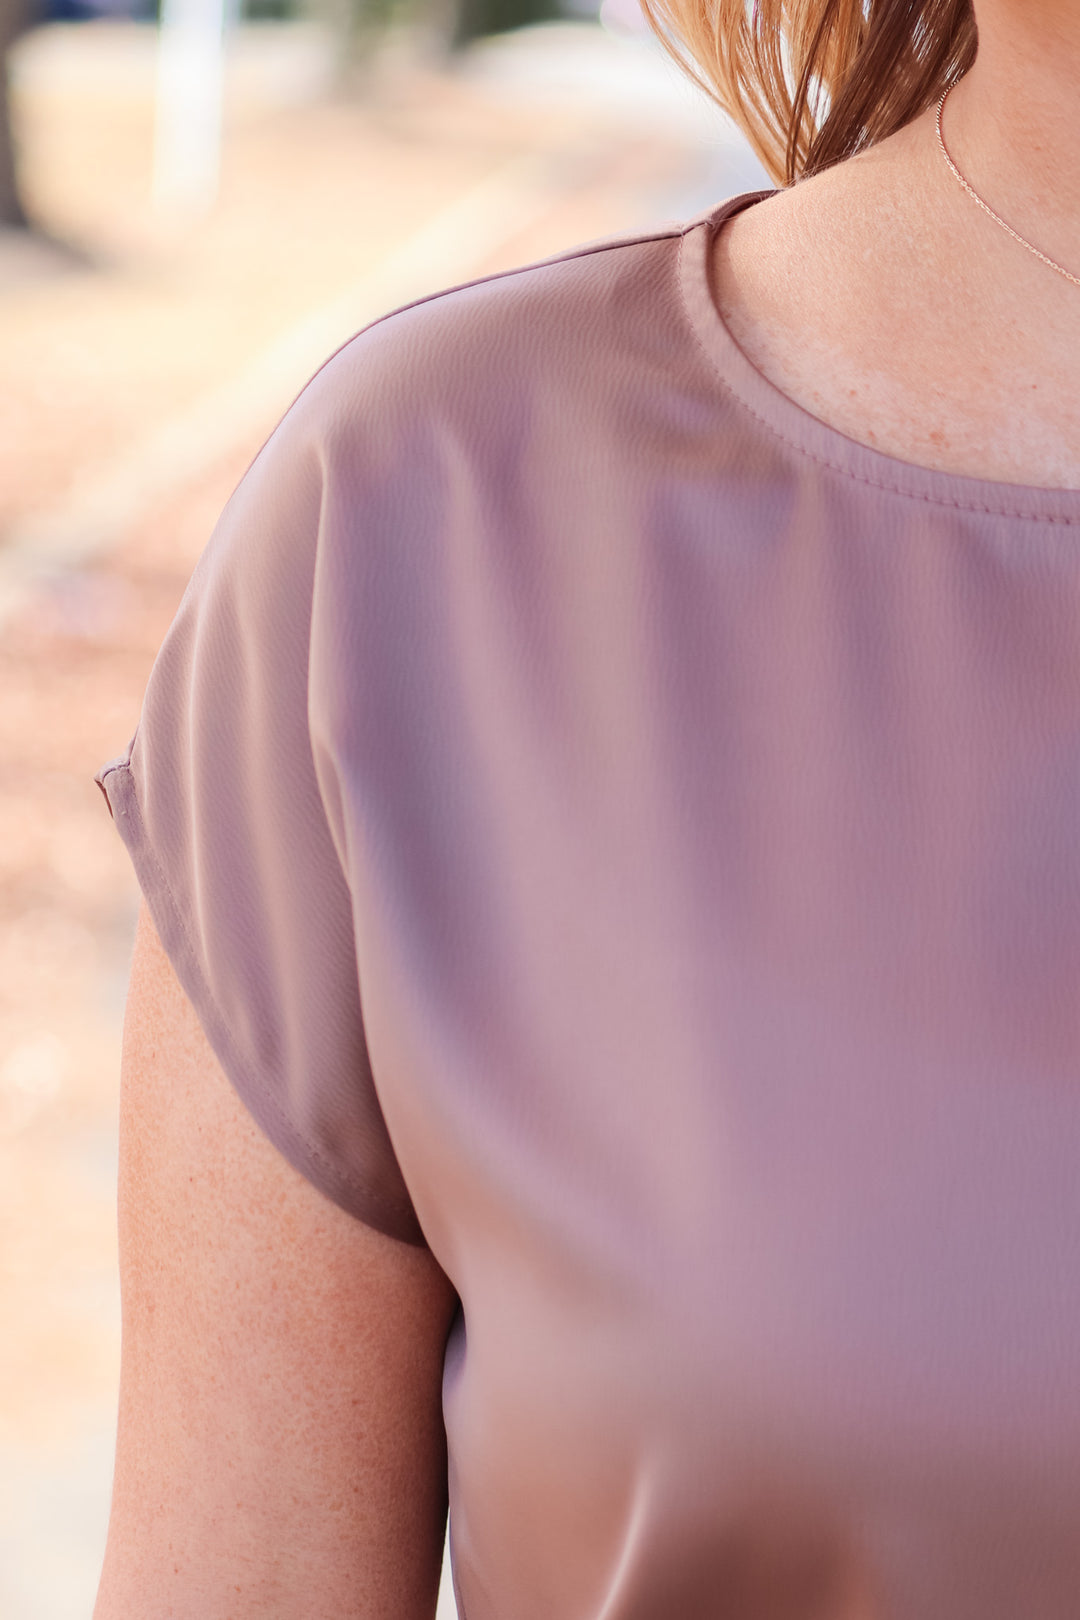 A closeup of the shoulder of a woman wearing a coffee colored satin top with cap sleeves.